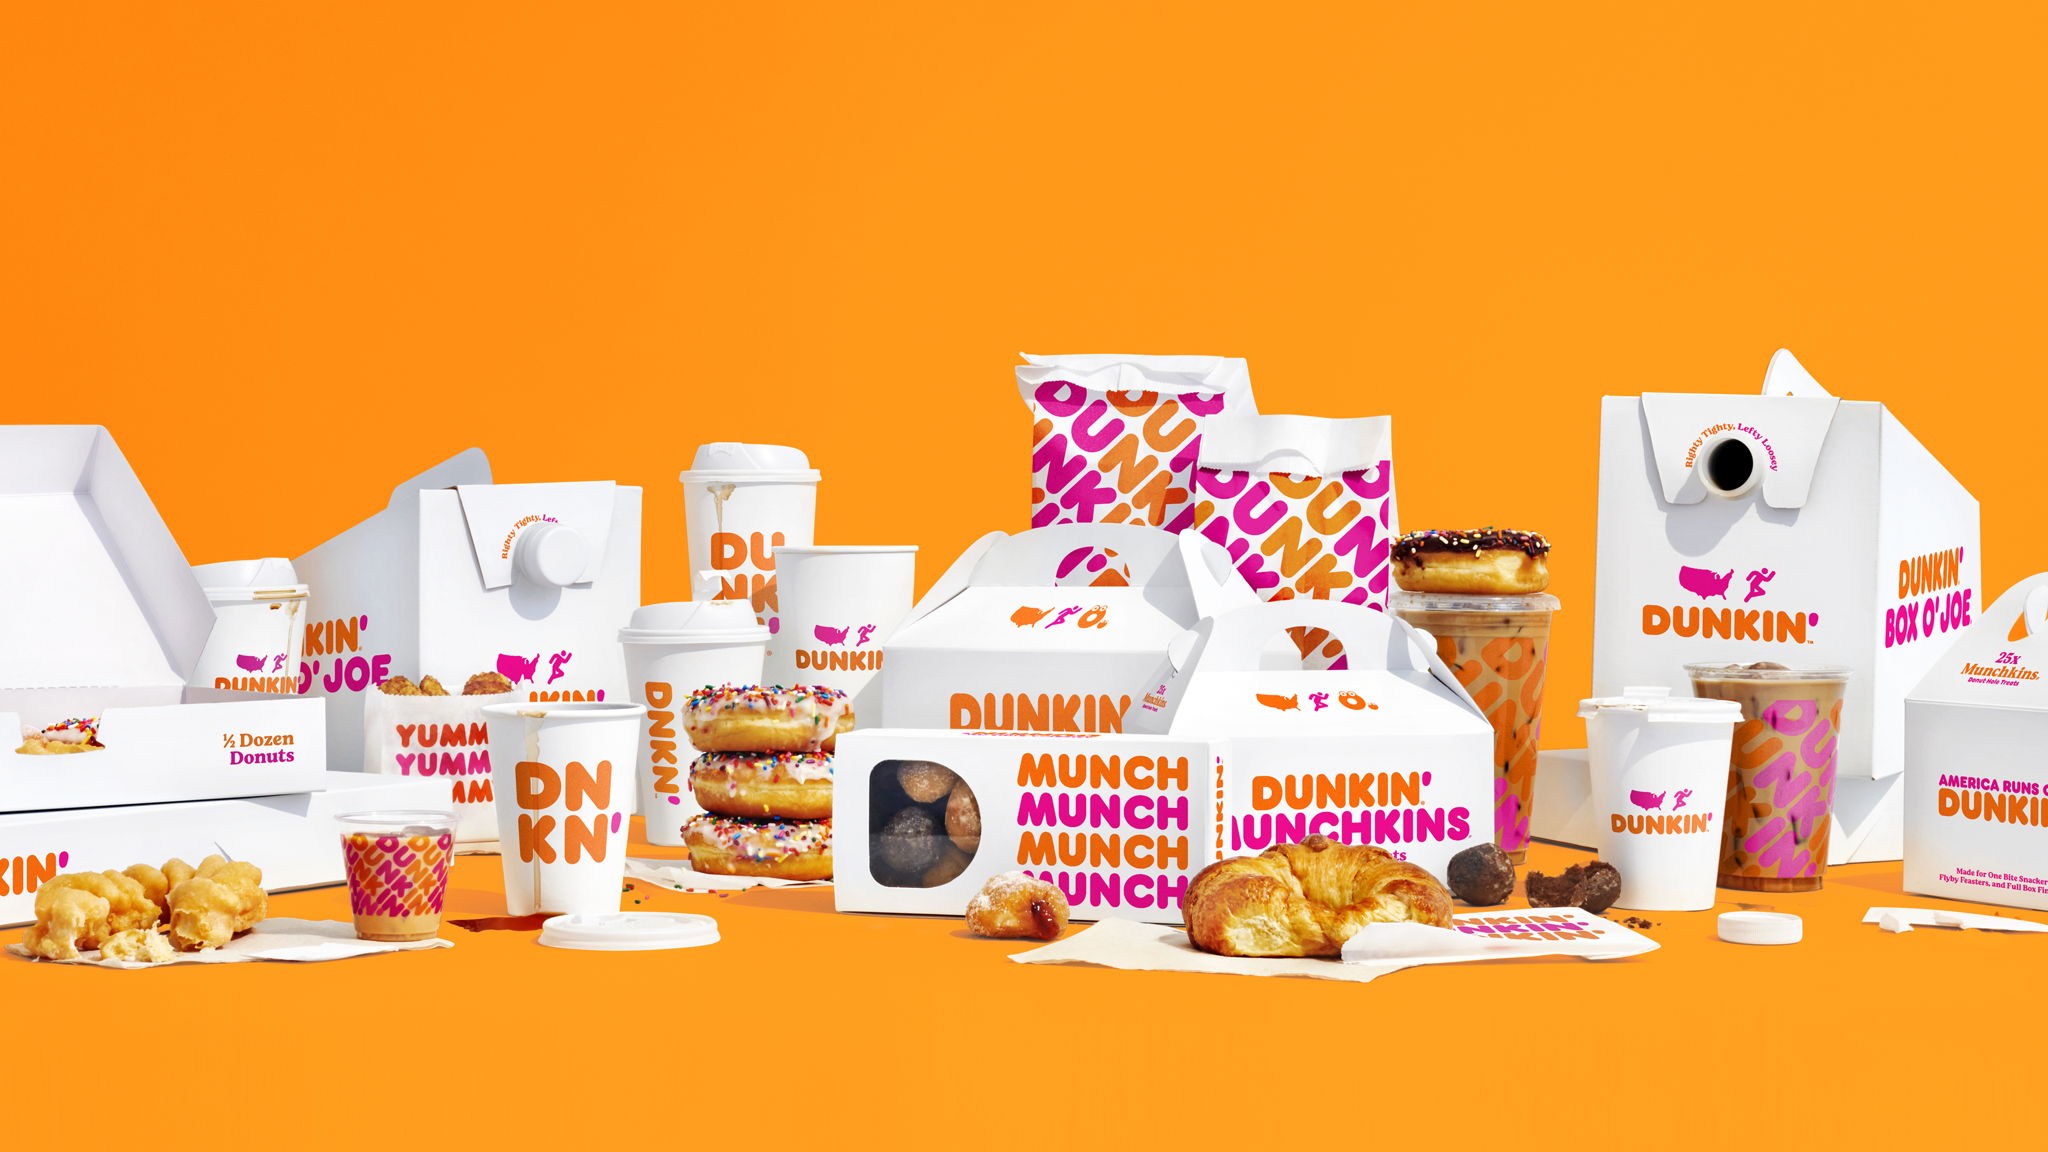 Marketing and branding for dunkin was more than almost any other franchise back then.